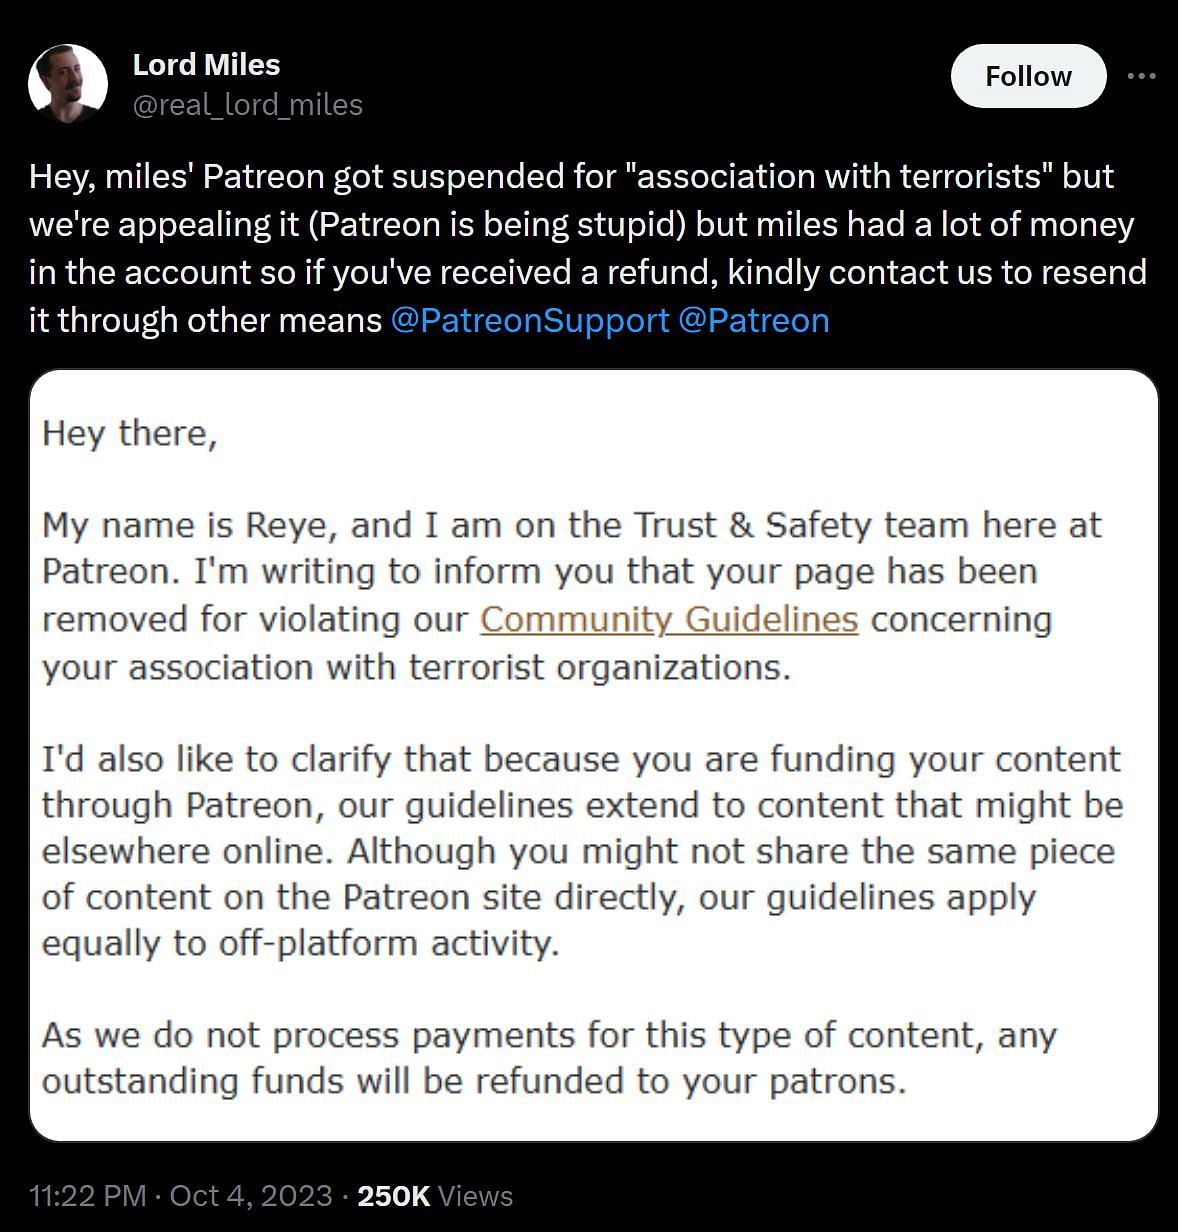 Patreon allegedly suspended his account for his associations with terrorism (Image via X/@real_lord_miles)